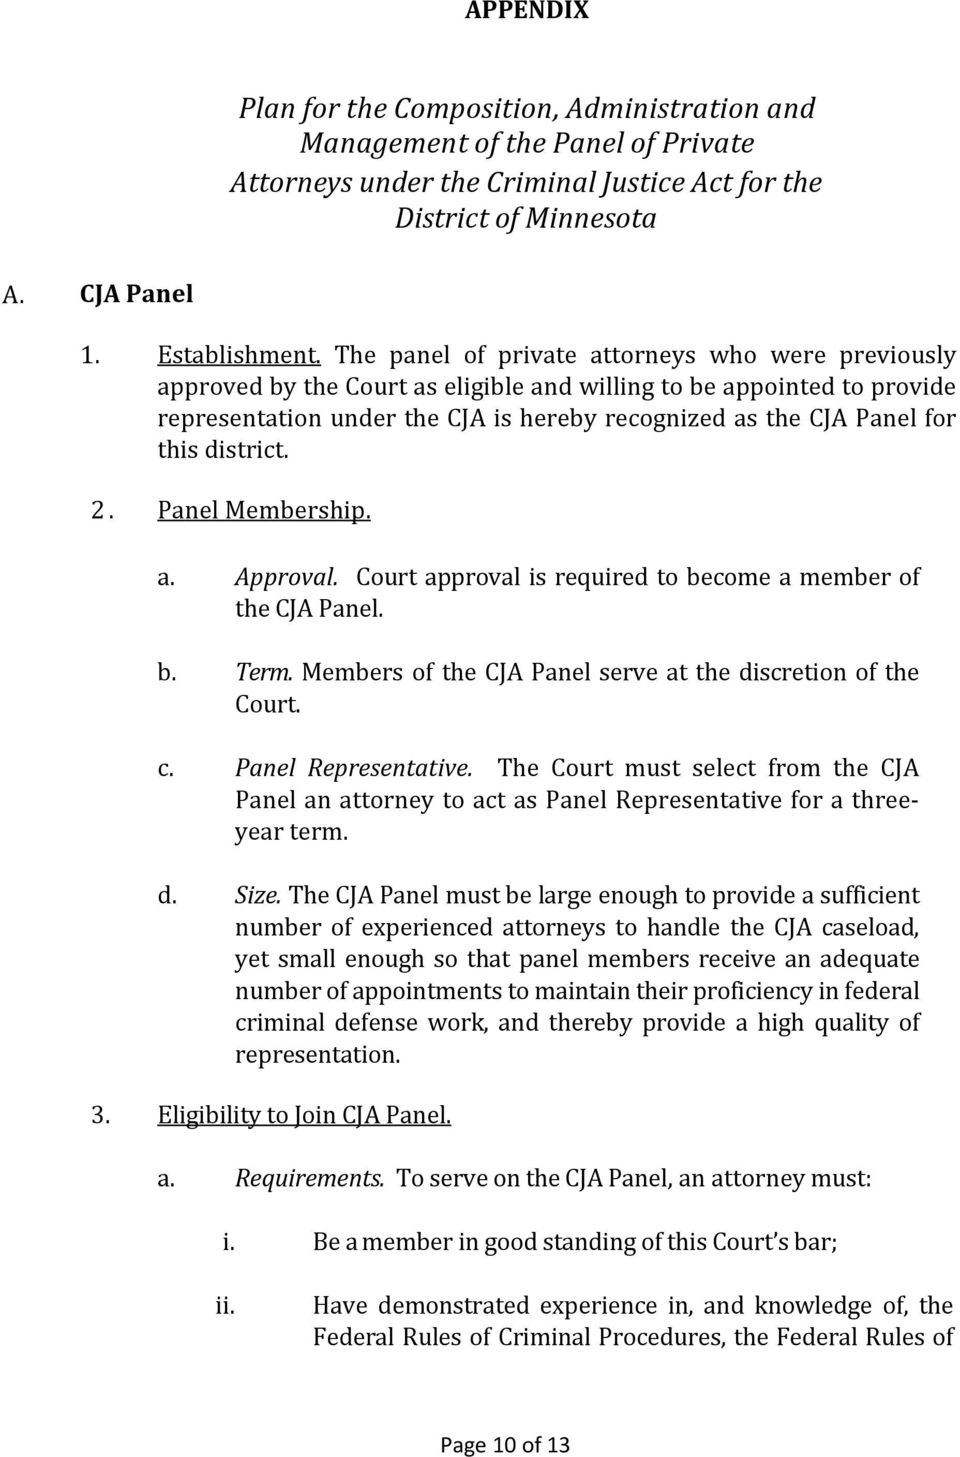 district. 2. Panel Membership. a. Approval. Court approval is required to become a member of the CJA Panel. b. Term. Members of the CJA Panel serve at the discretion of the Court. c.